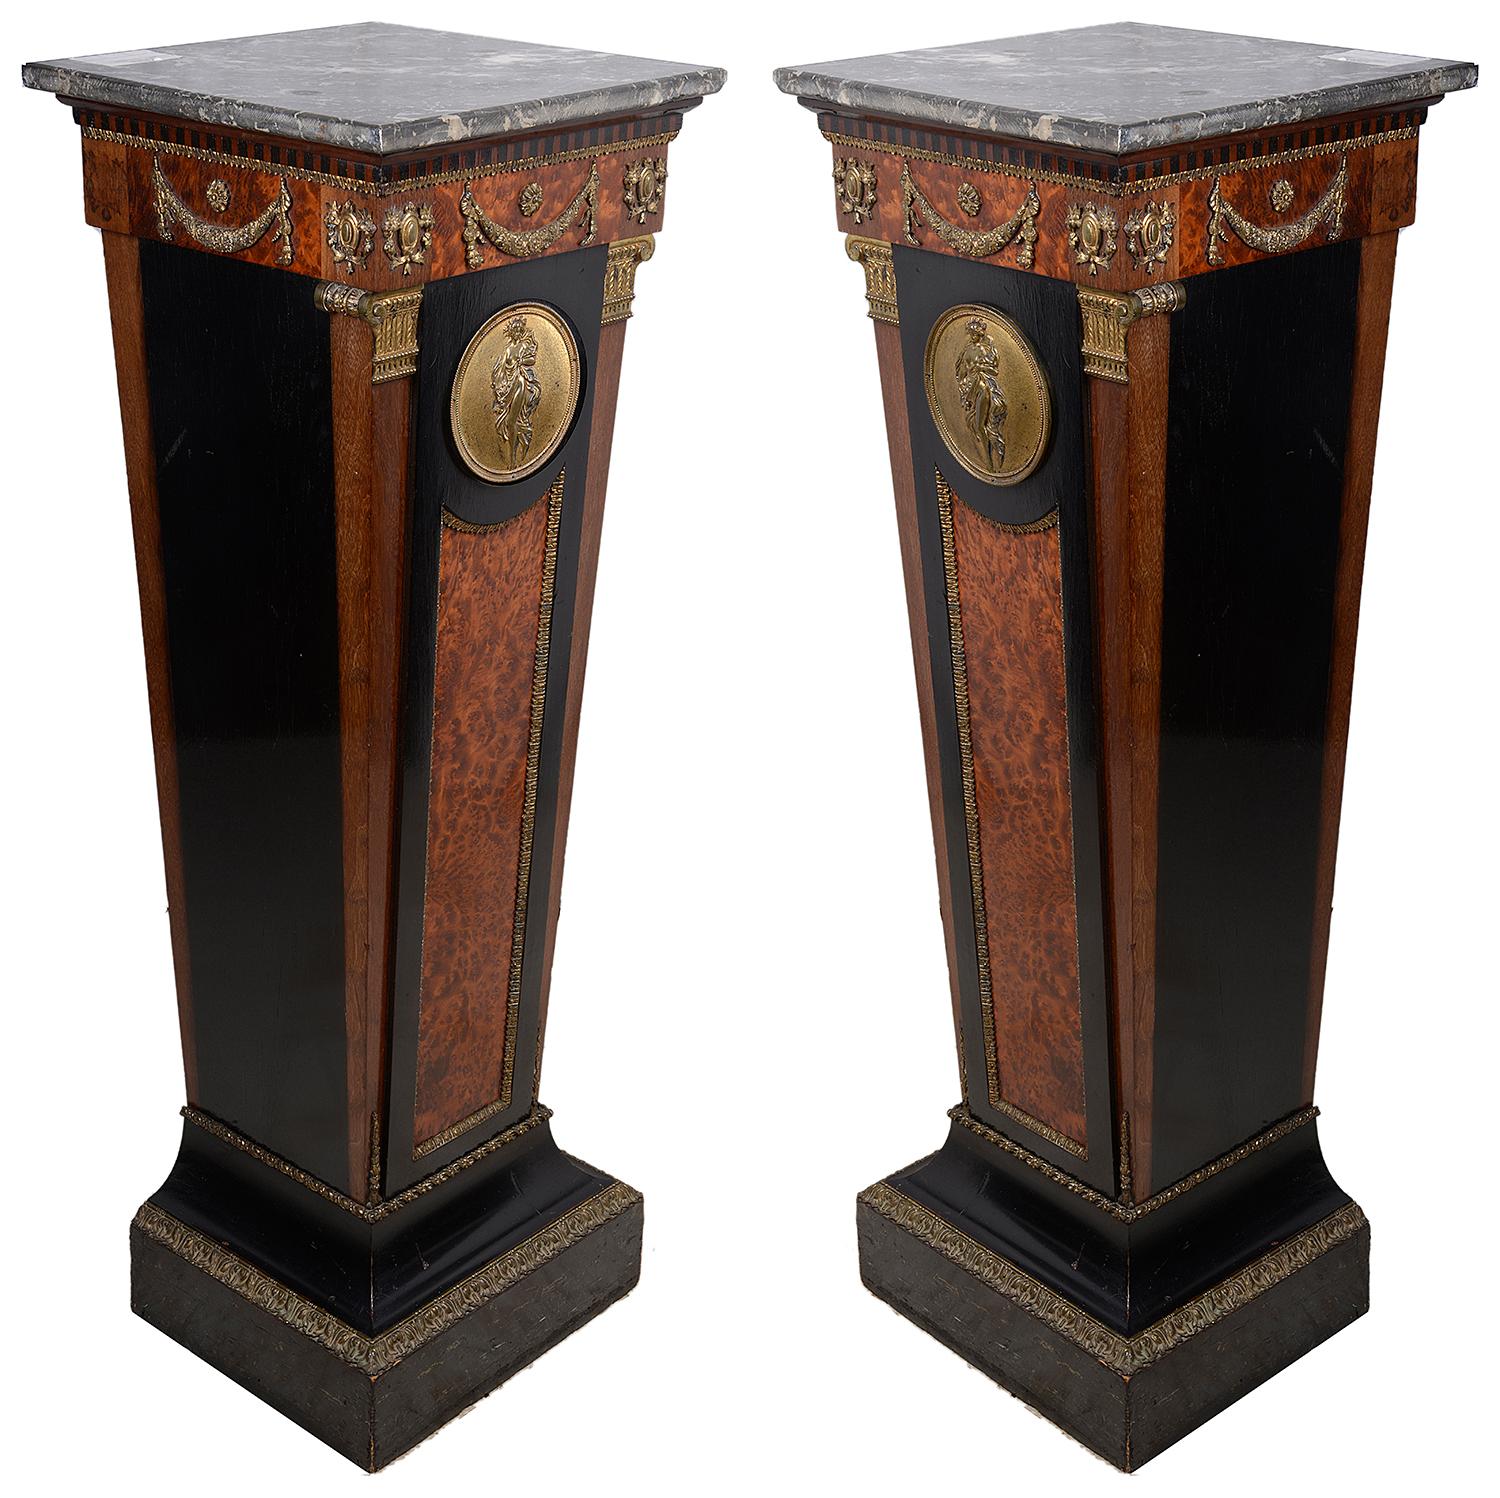 A good quality pair of 19th century French marble topped pedestals, each with classical gilded ormolu mounts of swags and columns, the circular plaques to the centre, depicting semi clad maidens. Ebonized and burr wood veneers.

 